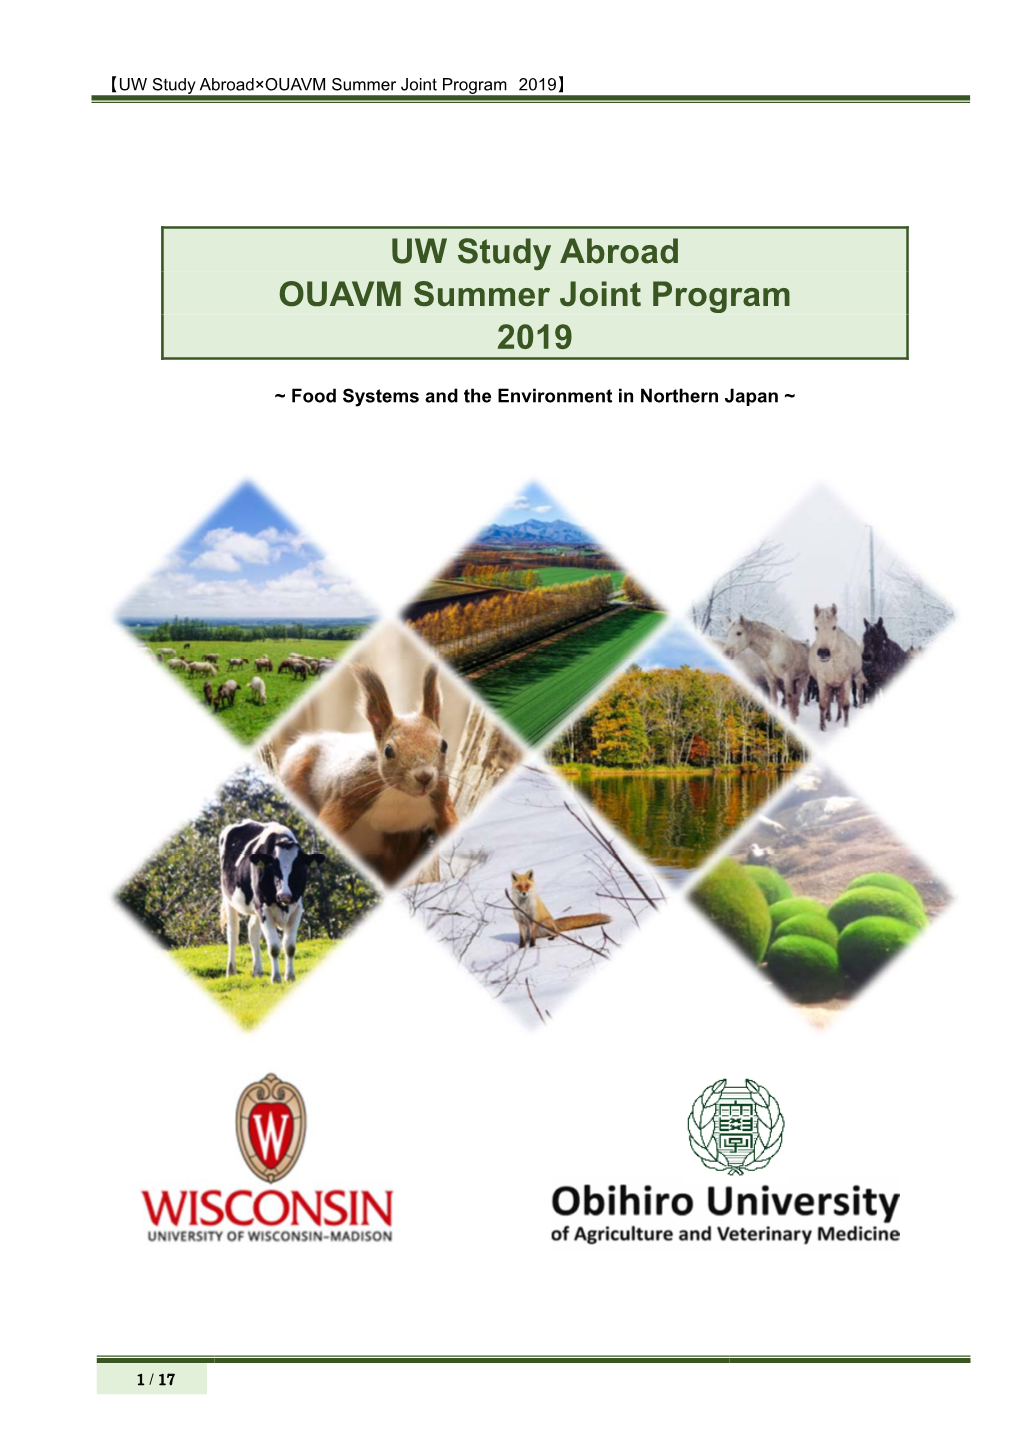 UW Study Abroad OUAVM Summer Joint Program 2019